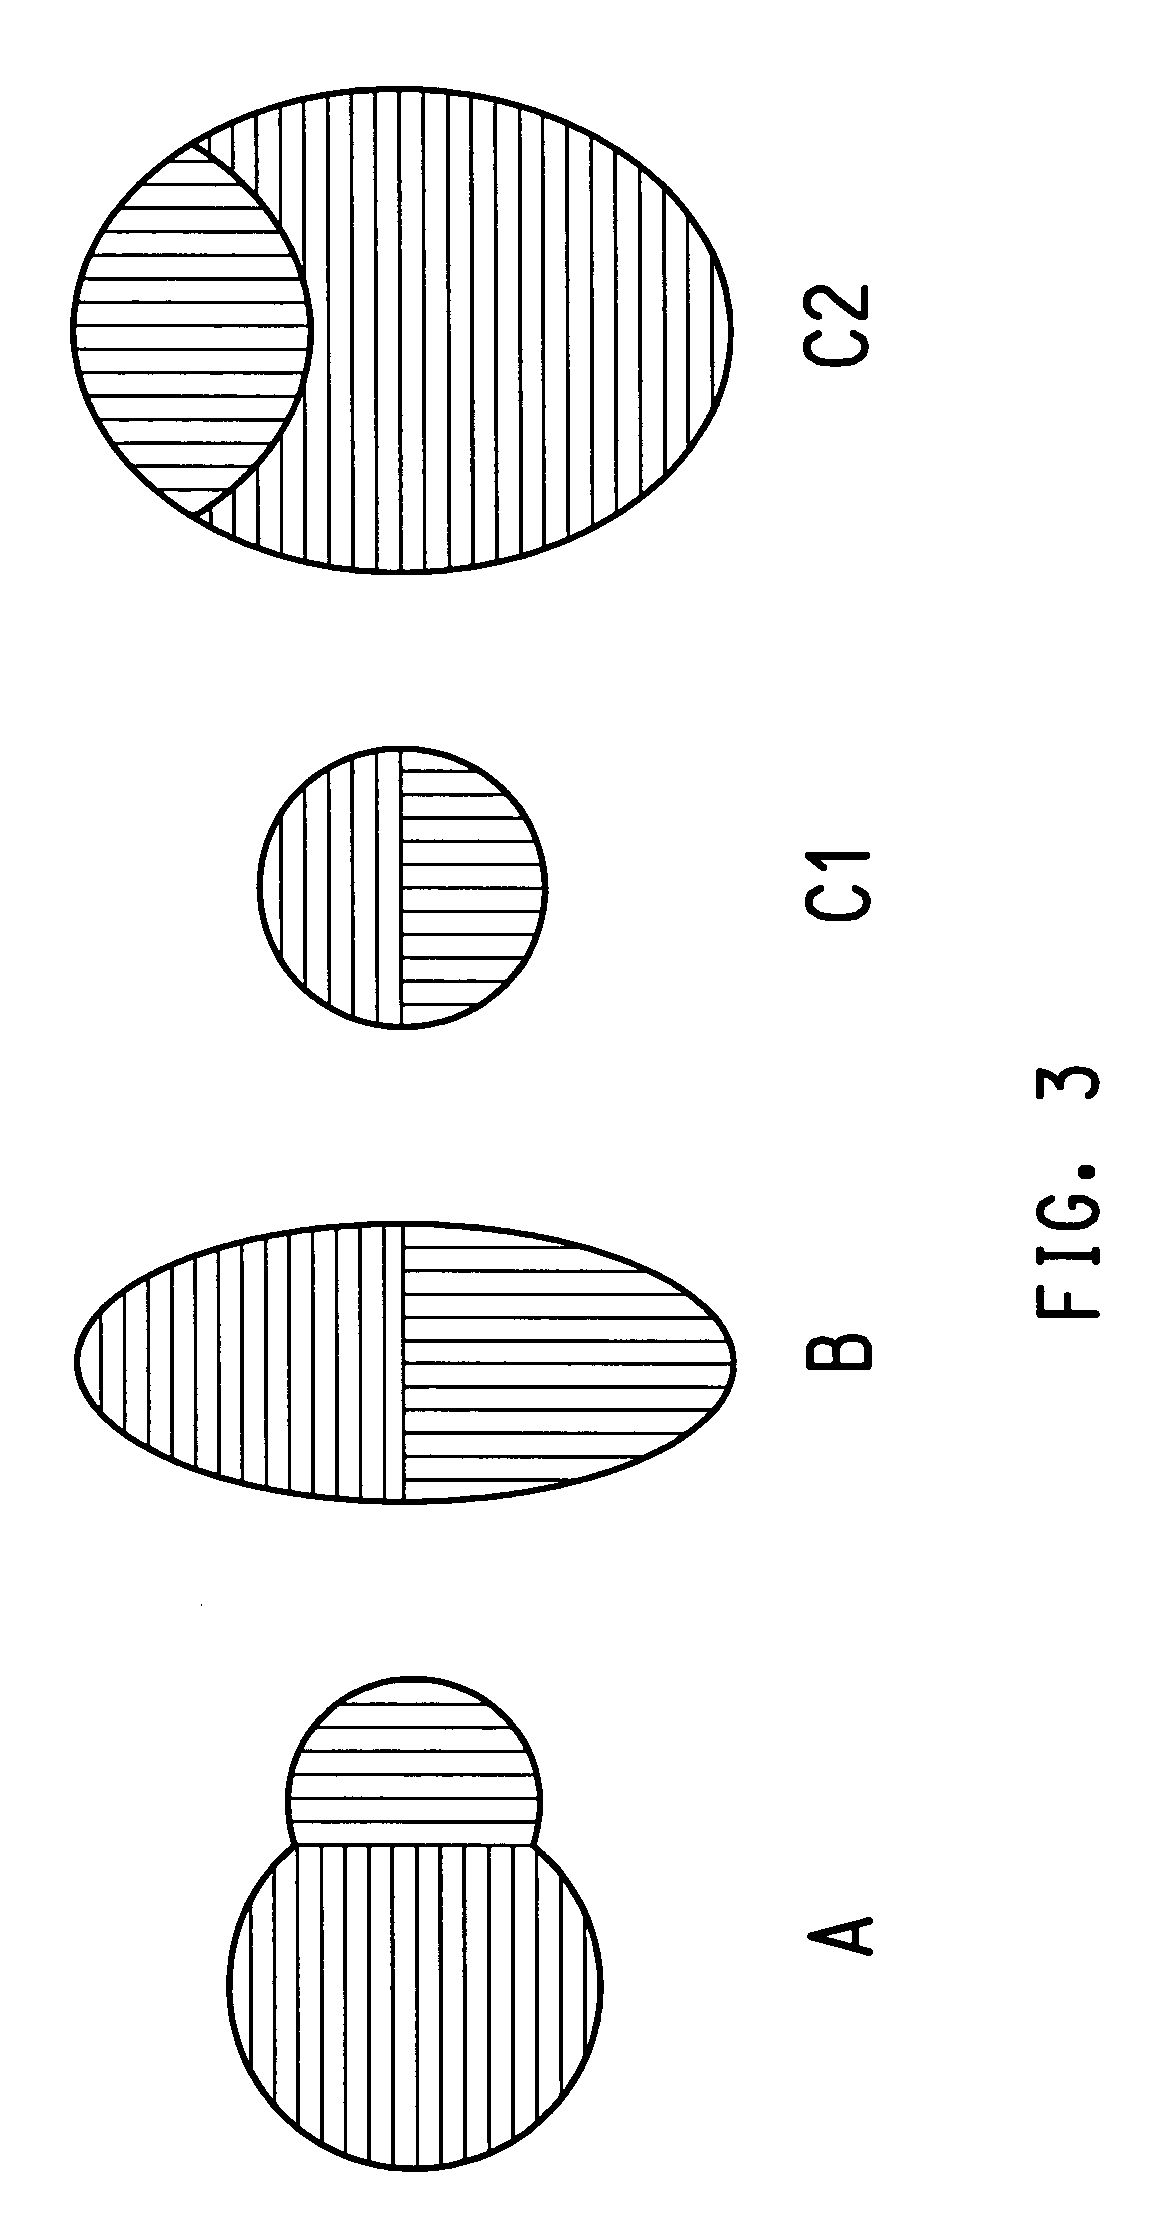 3gt/4gt biocomponent fiber and preparation thereof